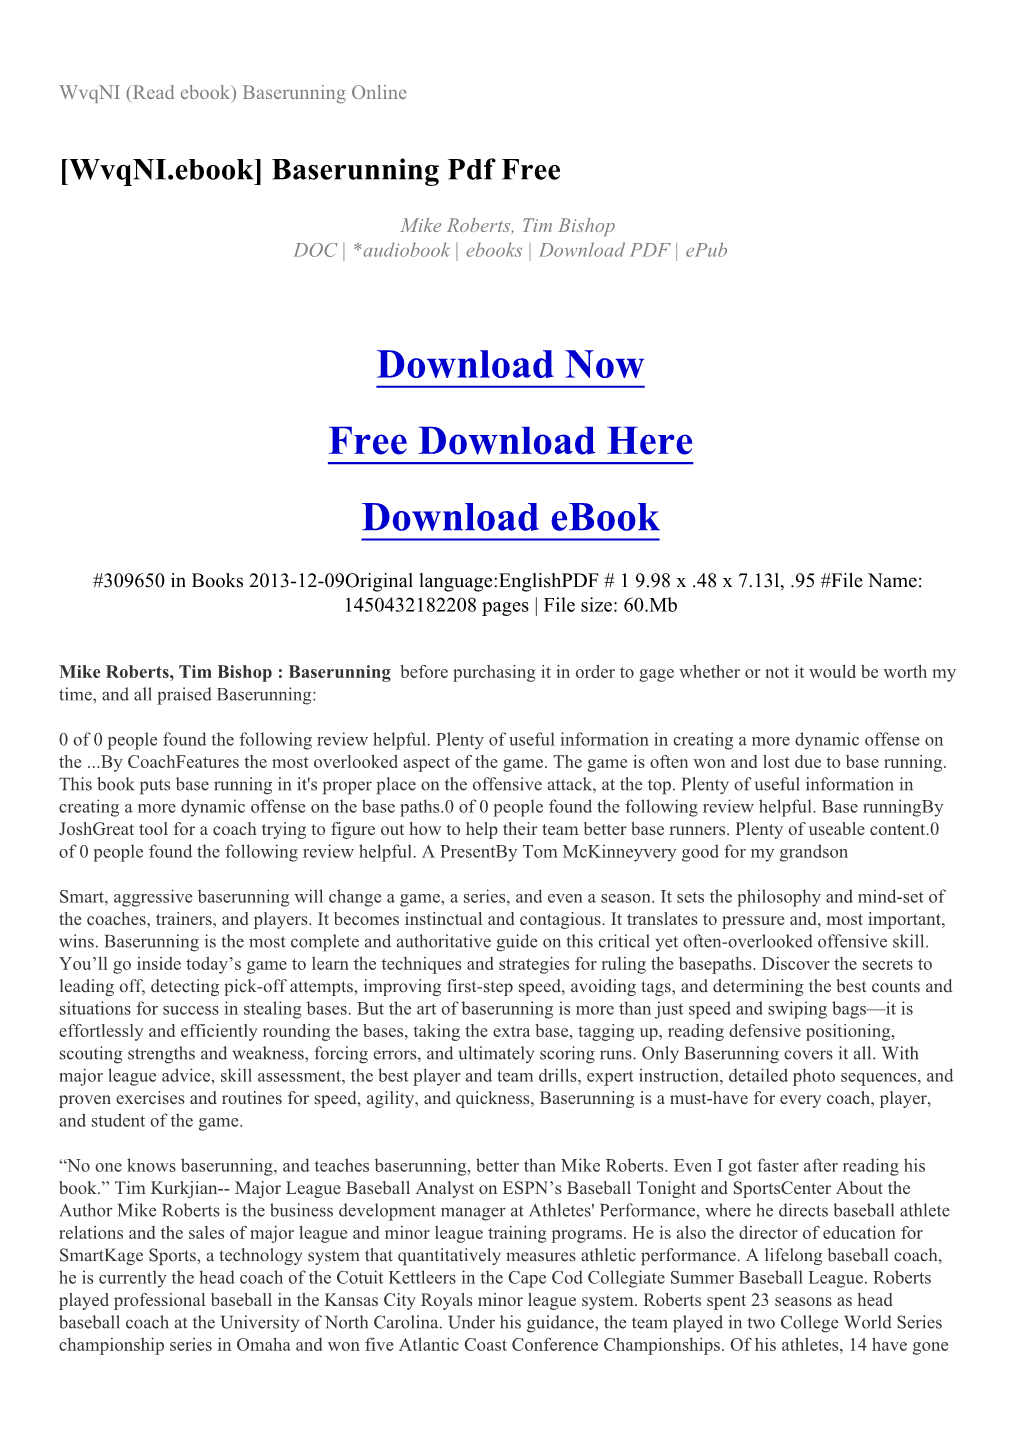 Download Now Free Download Here Download Ebook